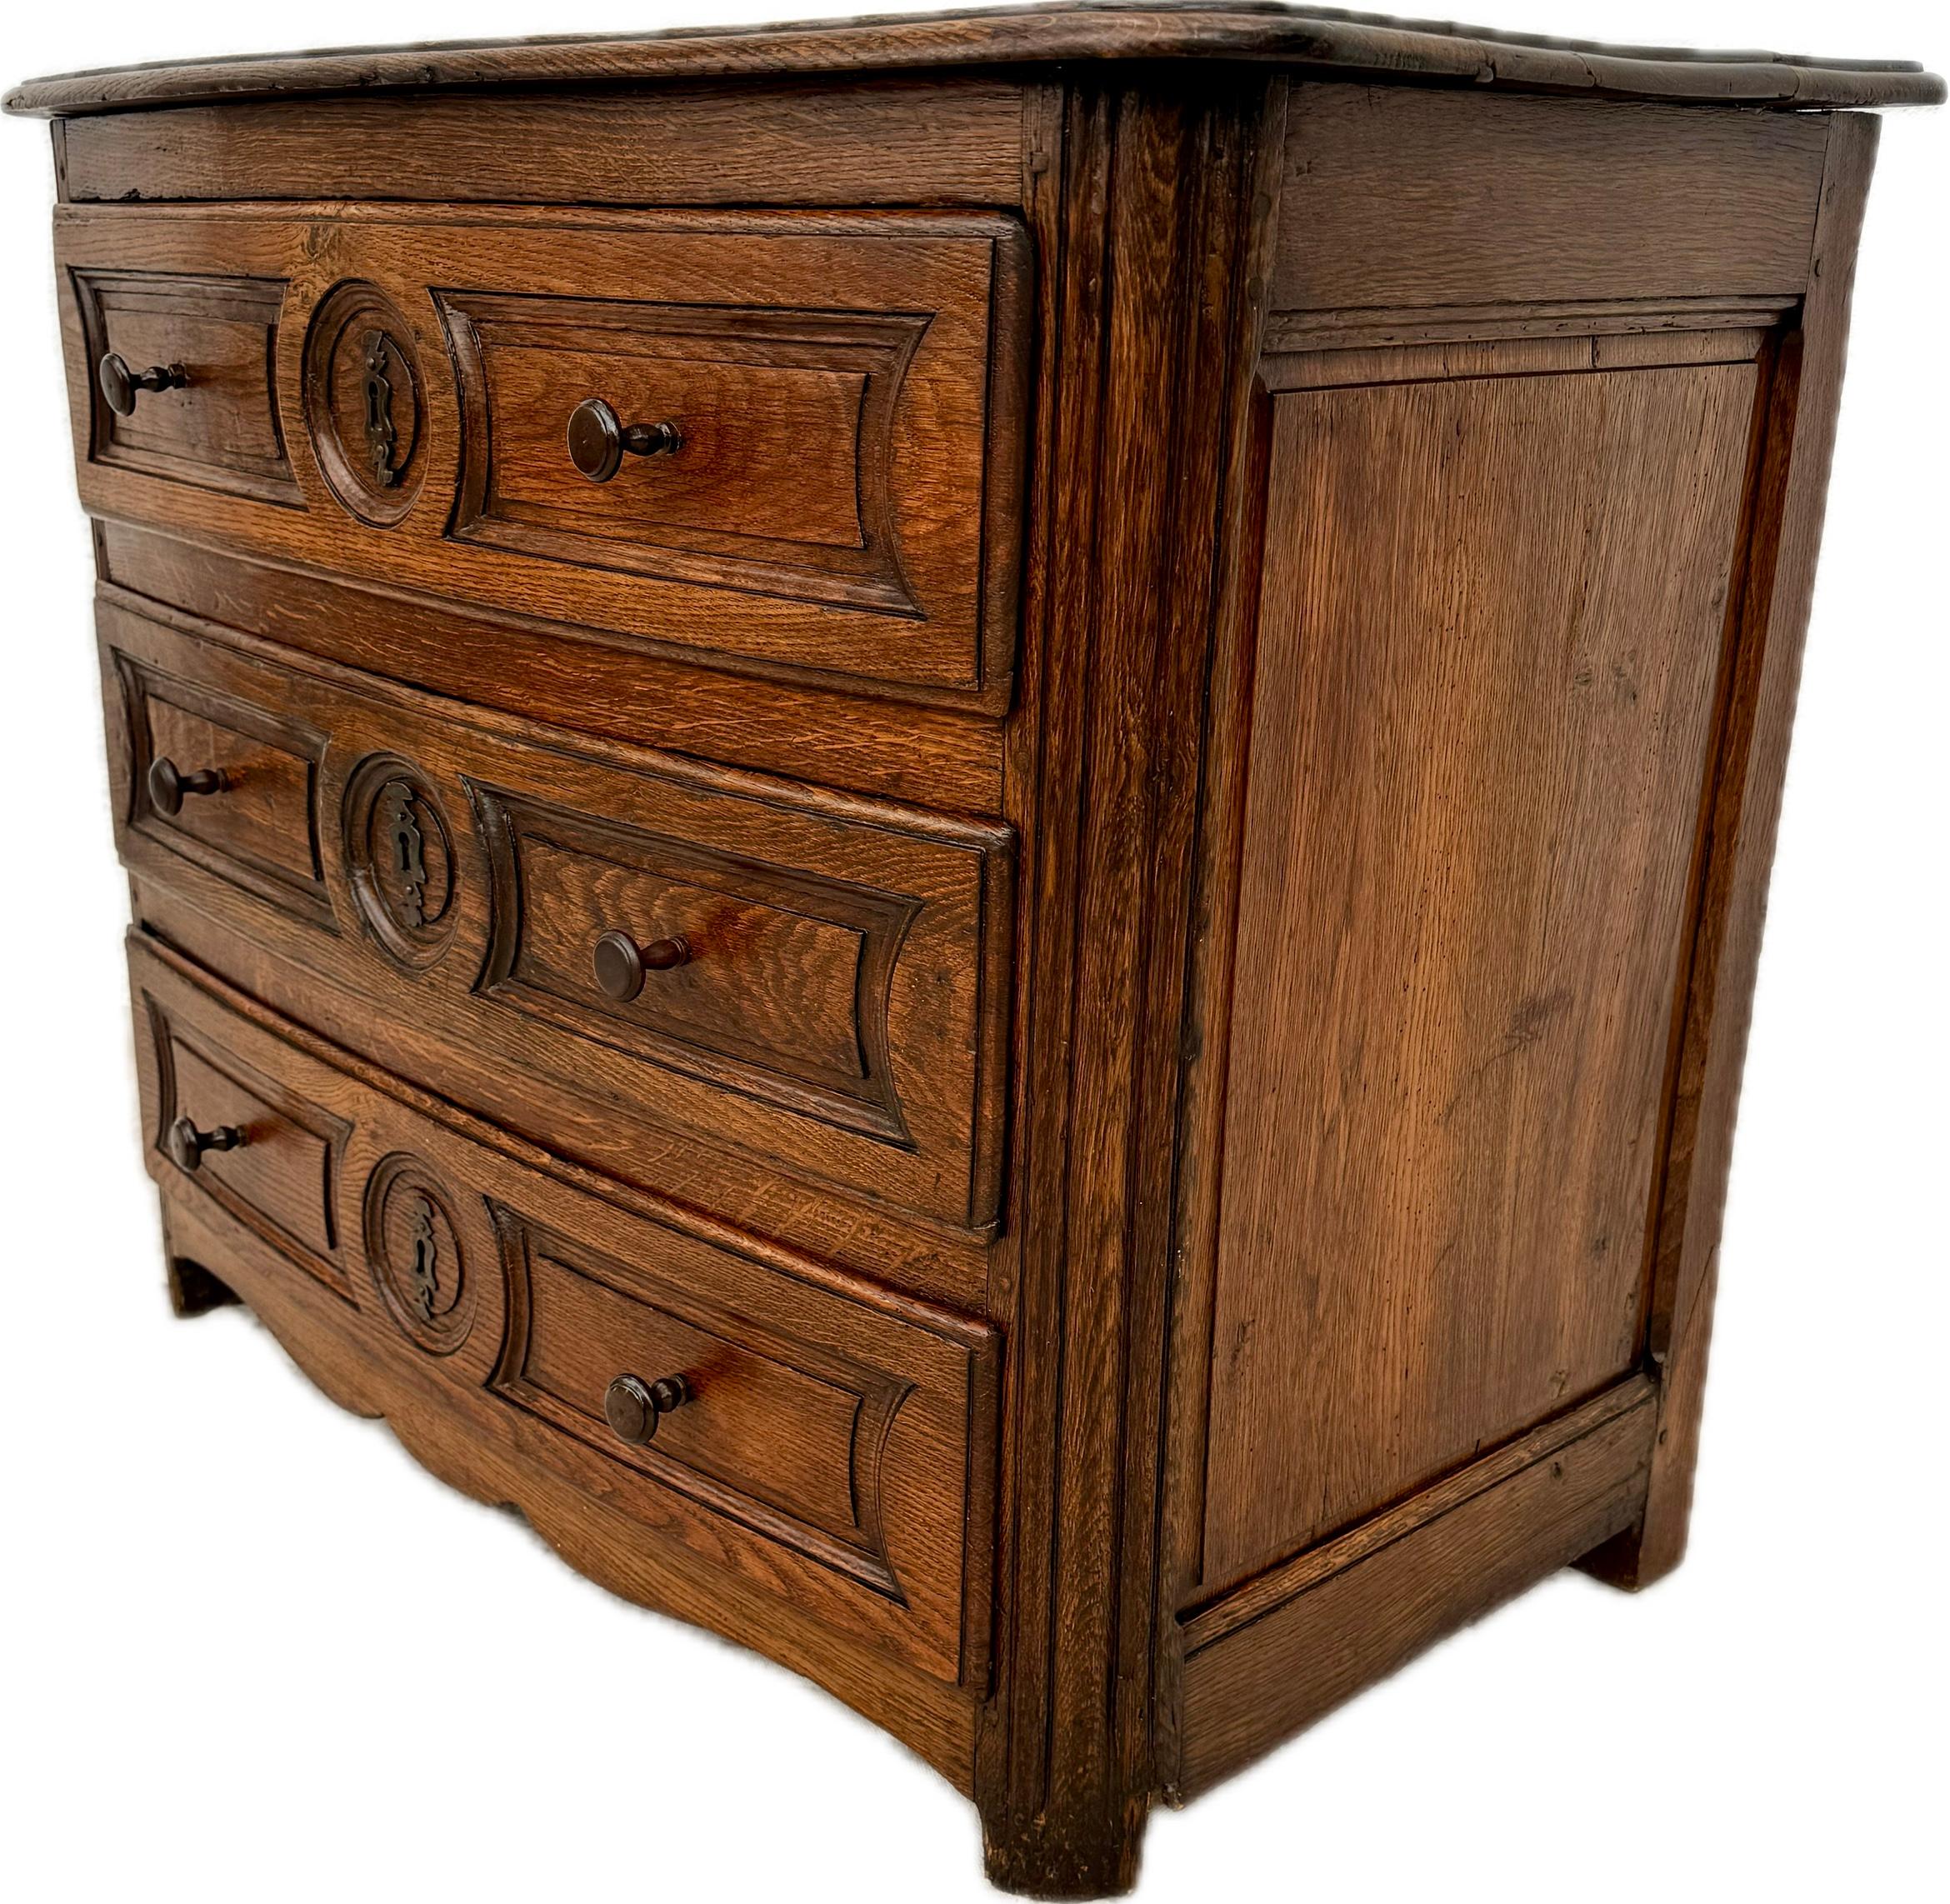 French Provincial Oak Commode, 18th Century In Good Condition For Sale In Bradenton, FL